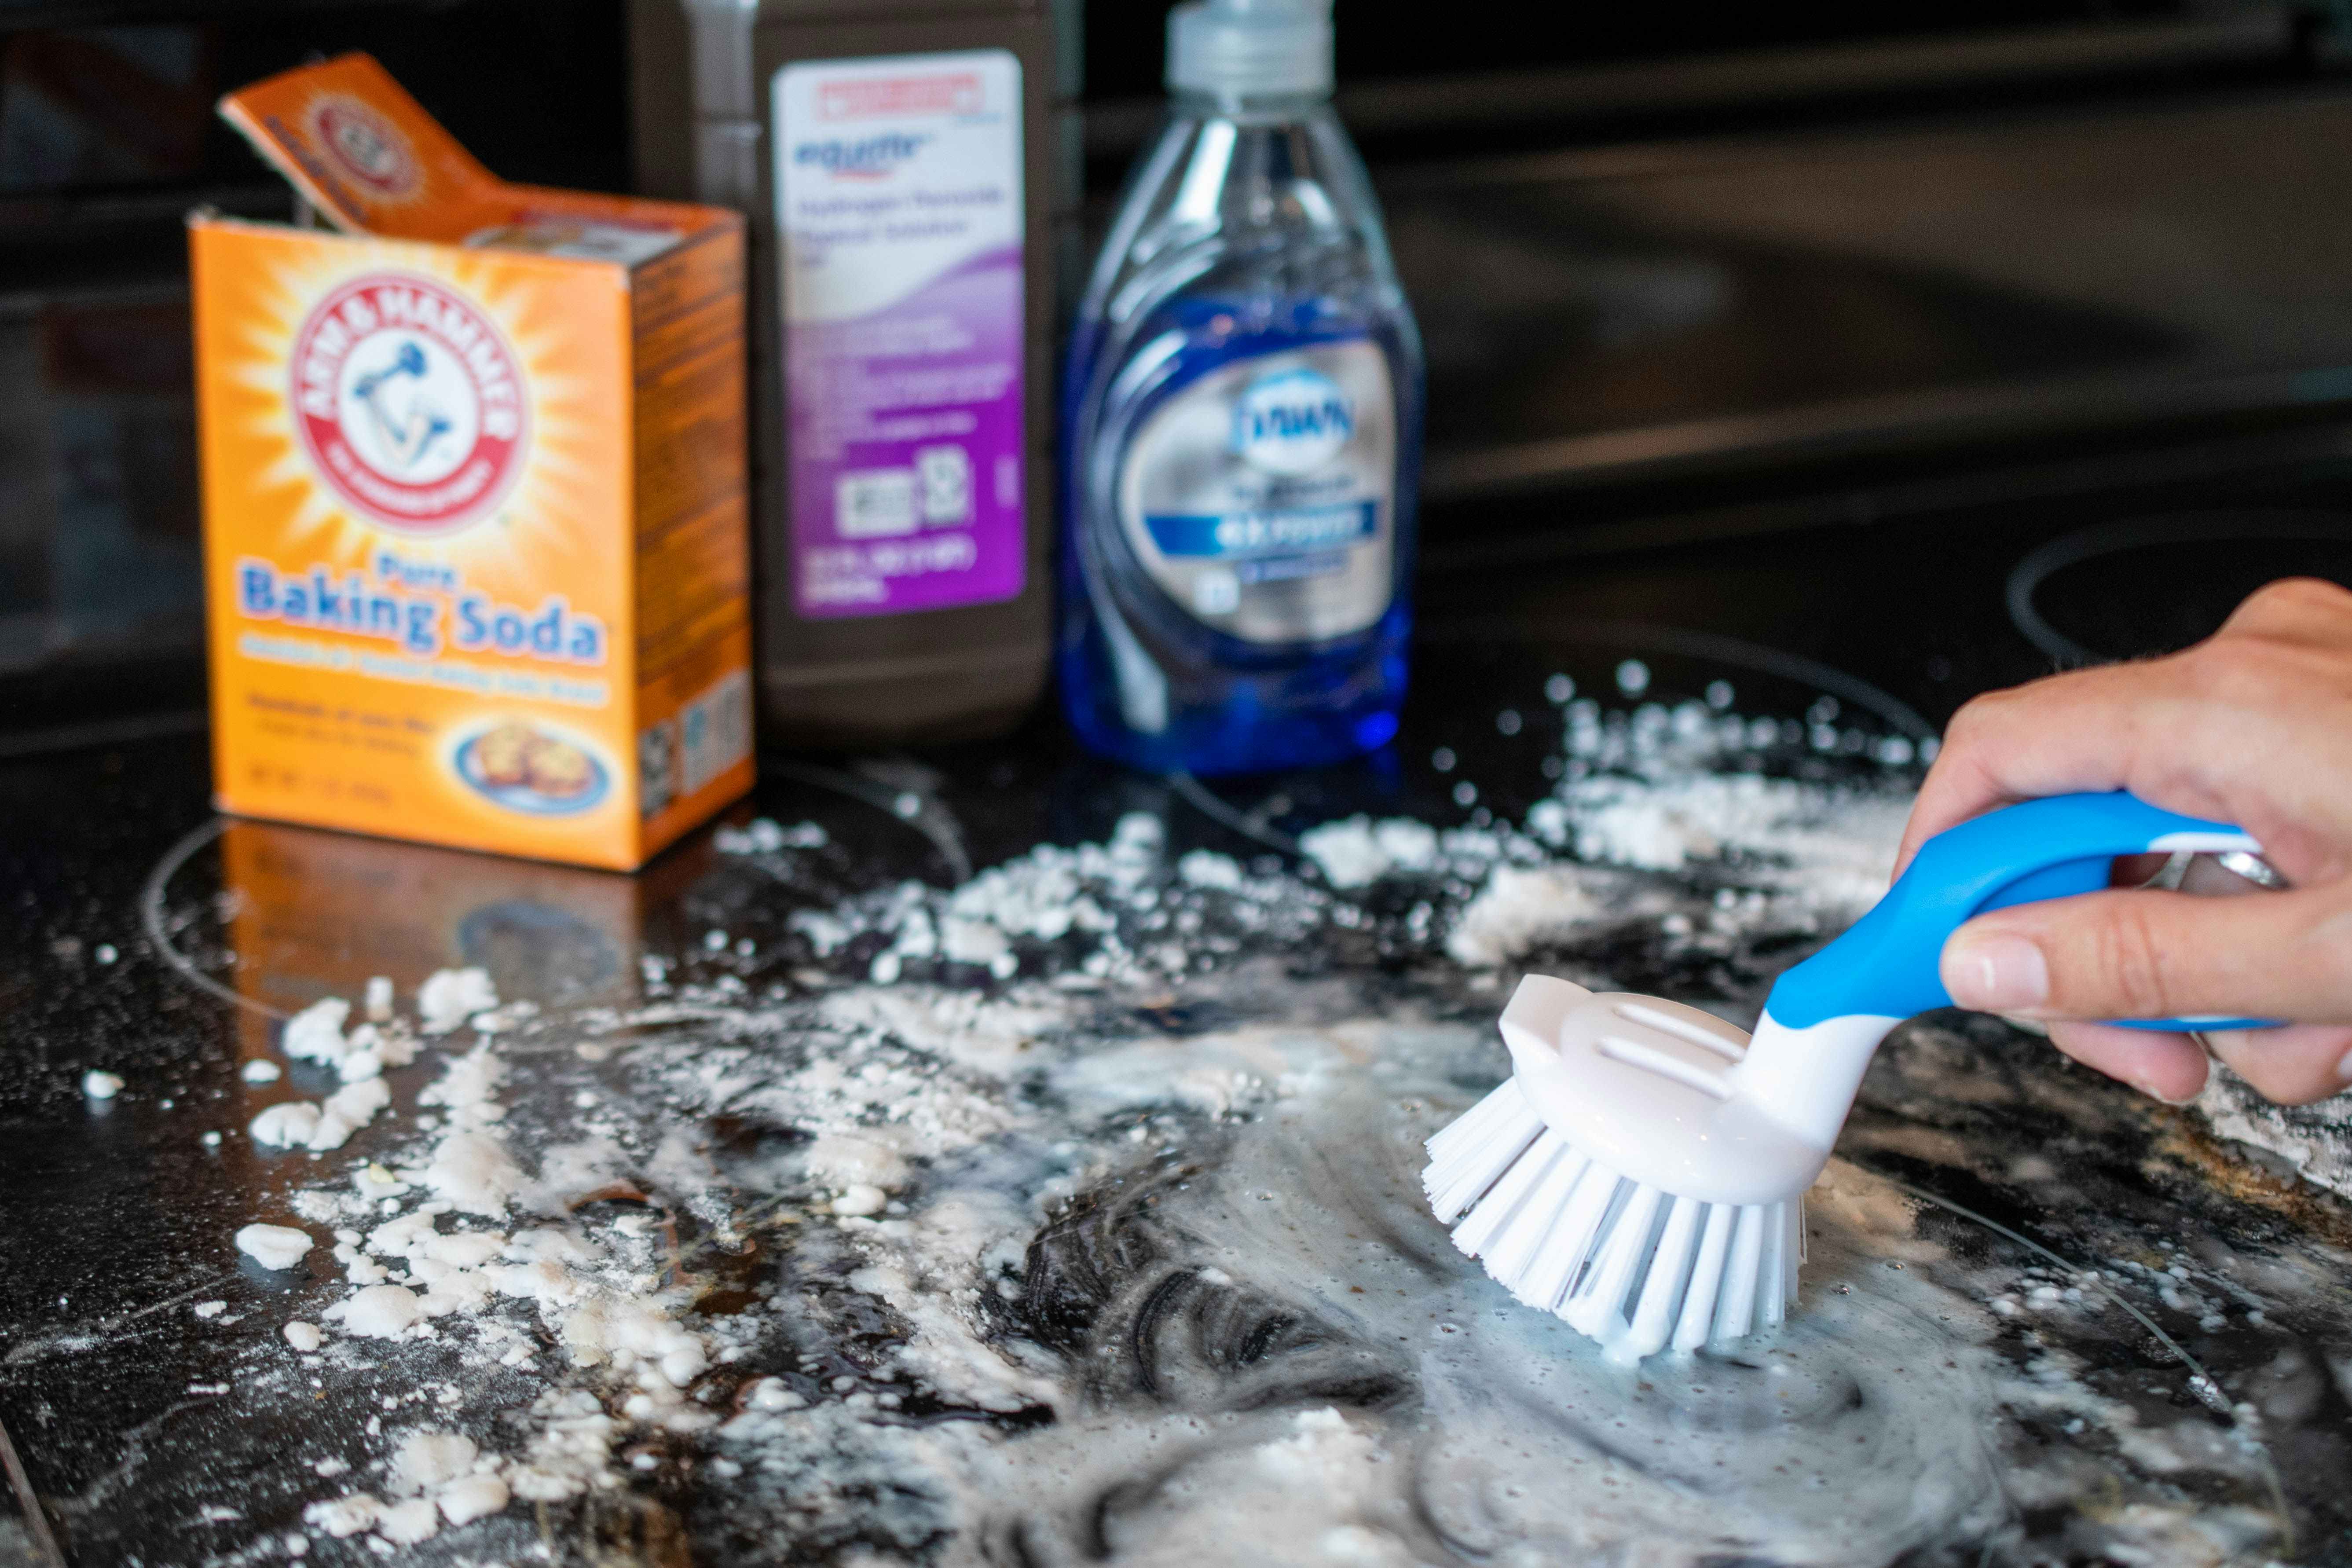 A person scrubbing a glass stove top with making soda, hydrogen peroxide, and dawn dish soap